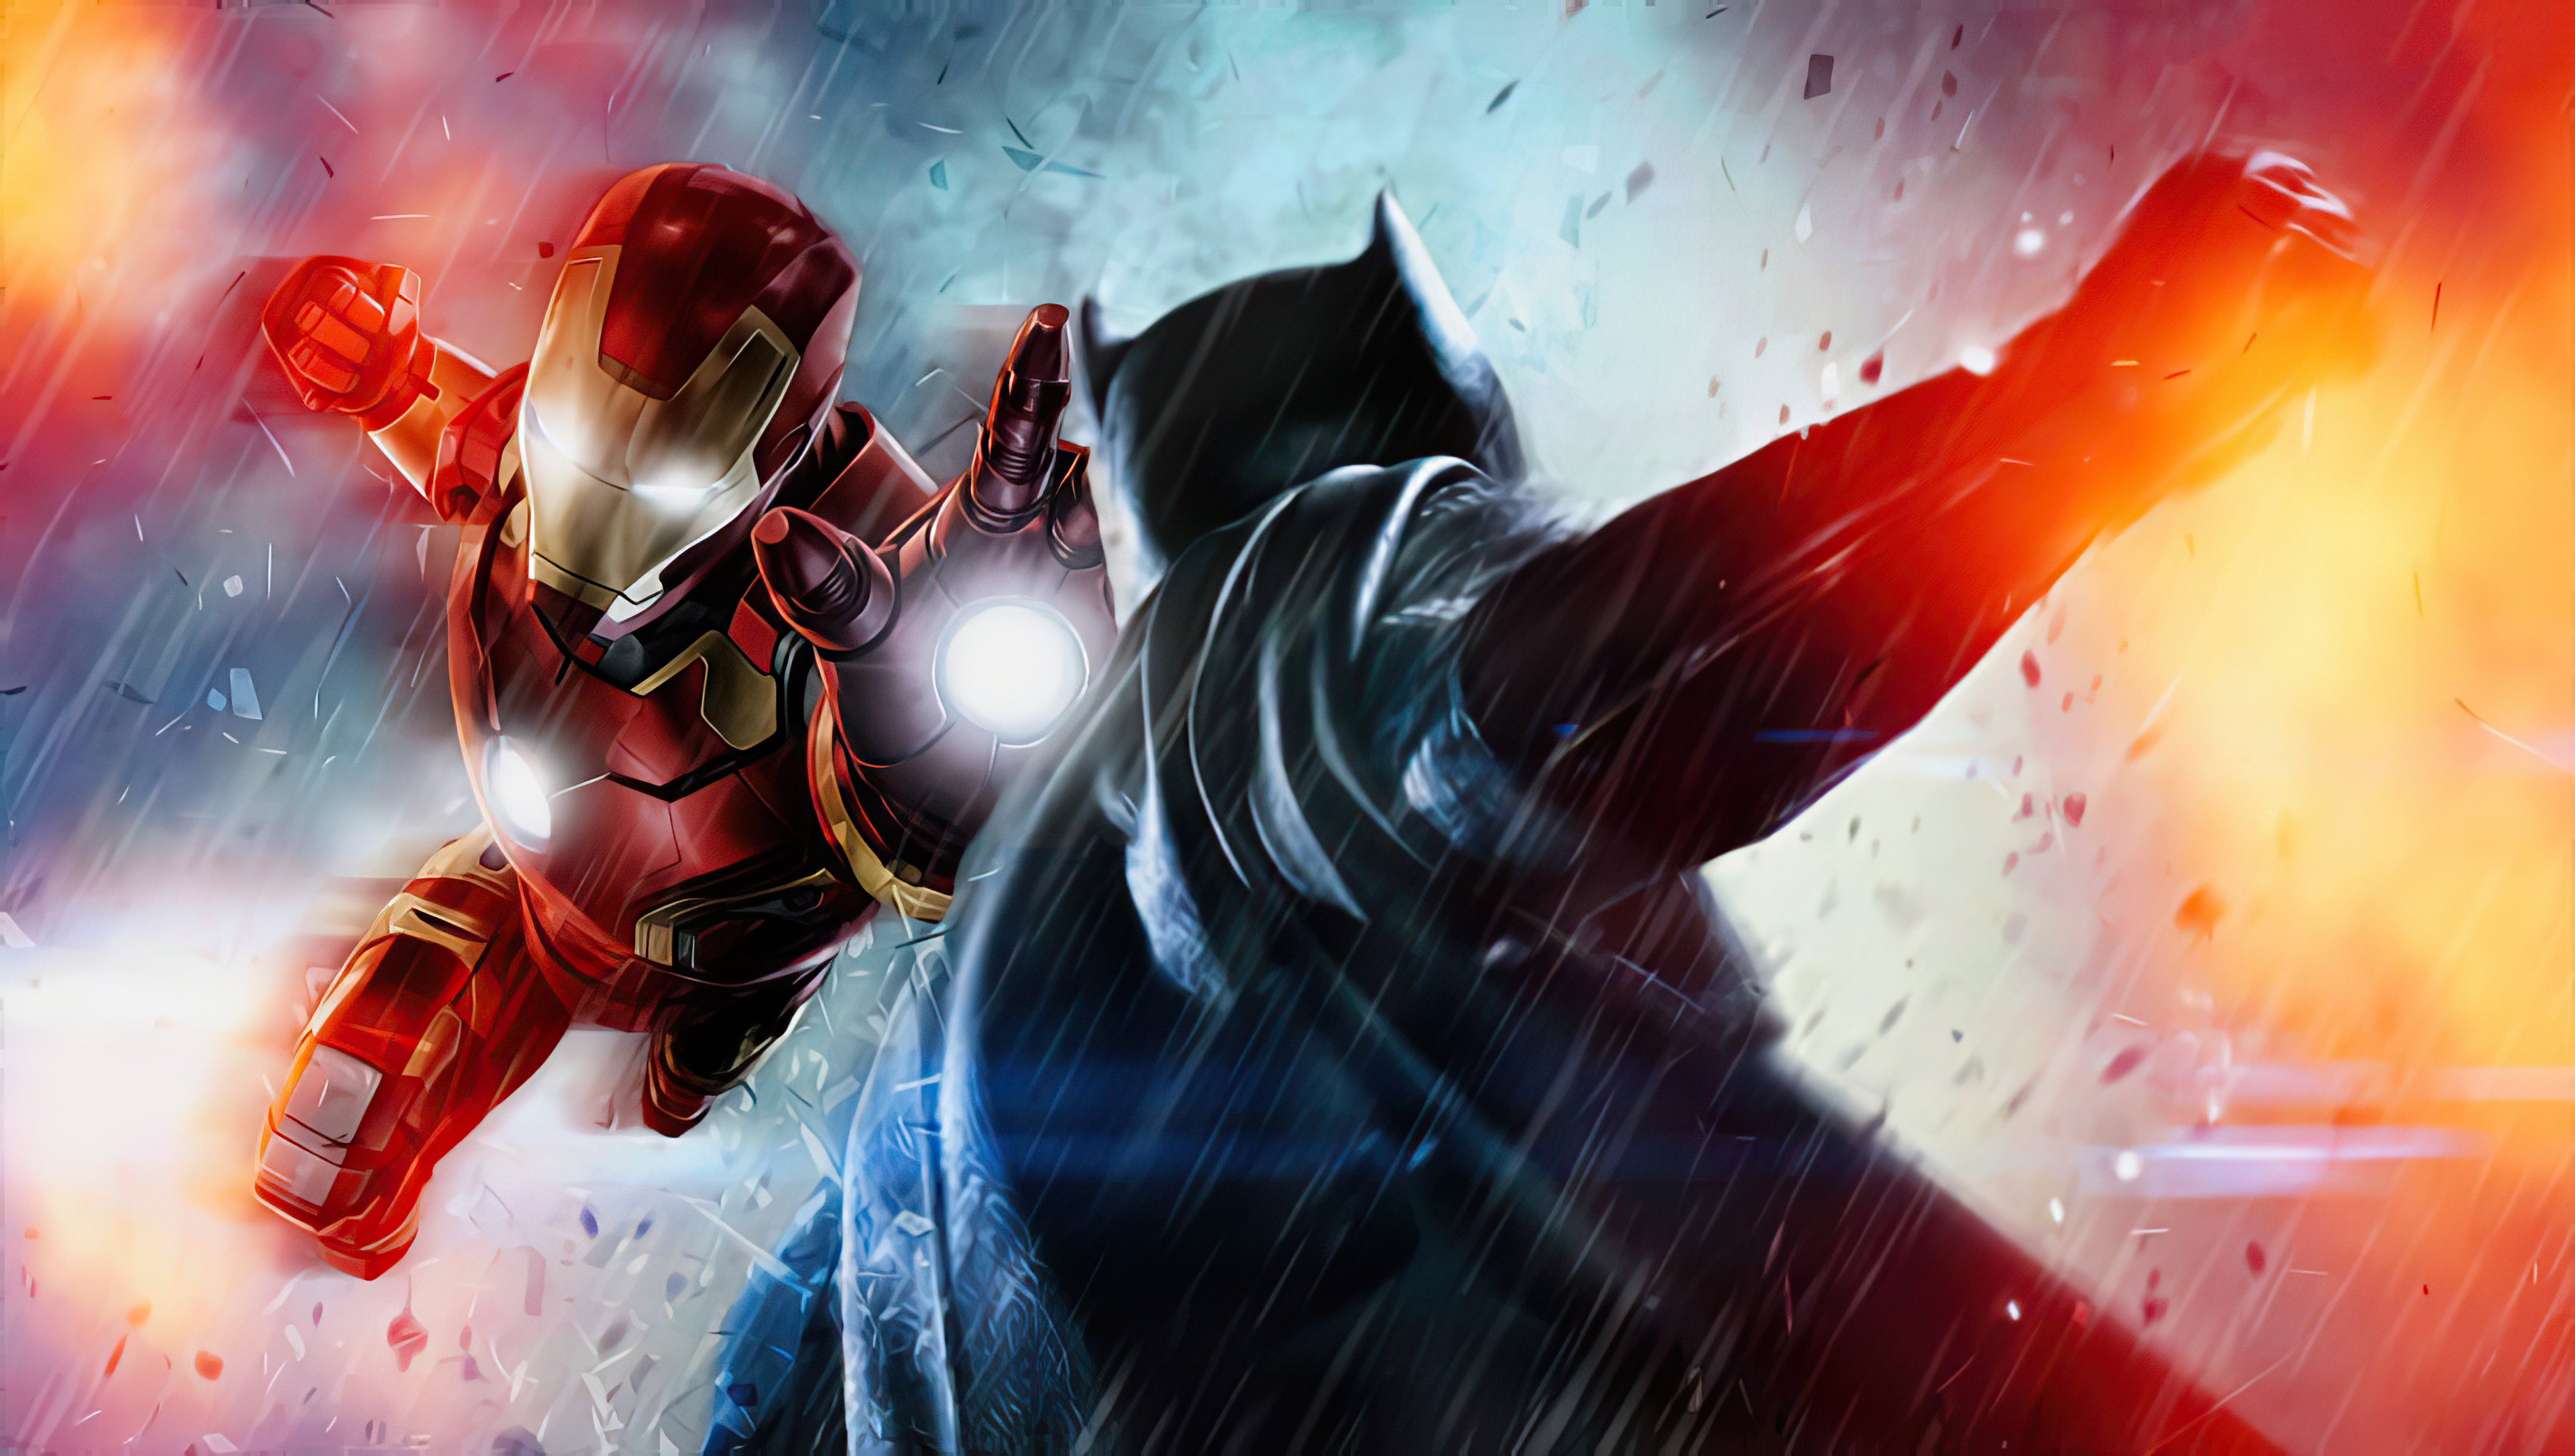 Iron man vs batman k hd superheroes k wallpapers images backgrounds photos and pictures